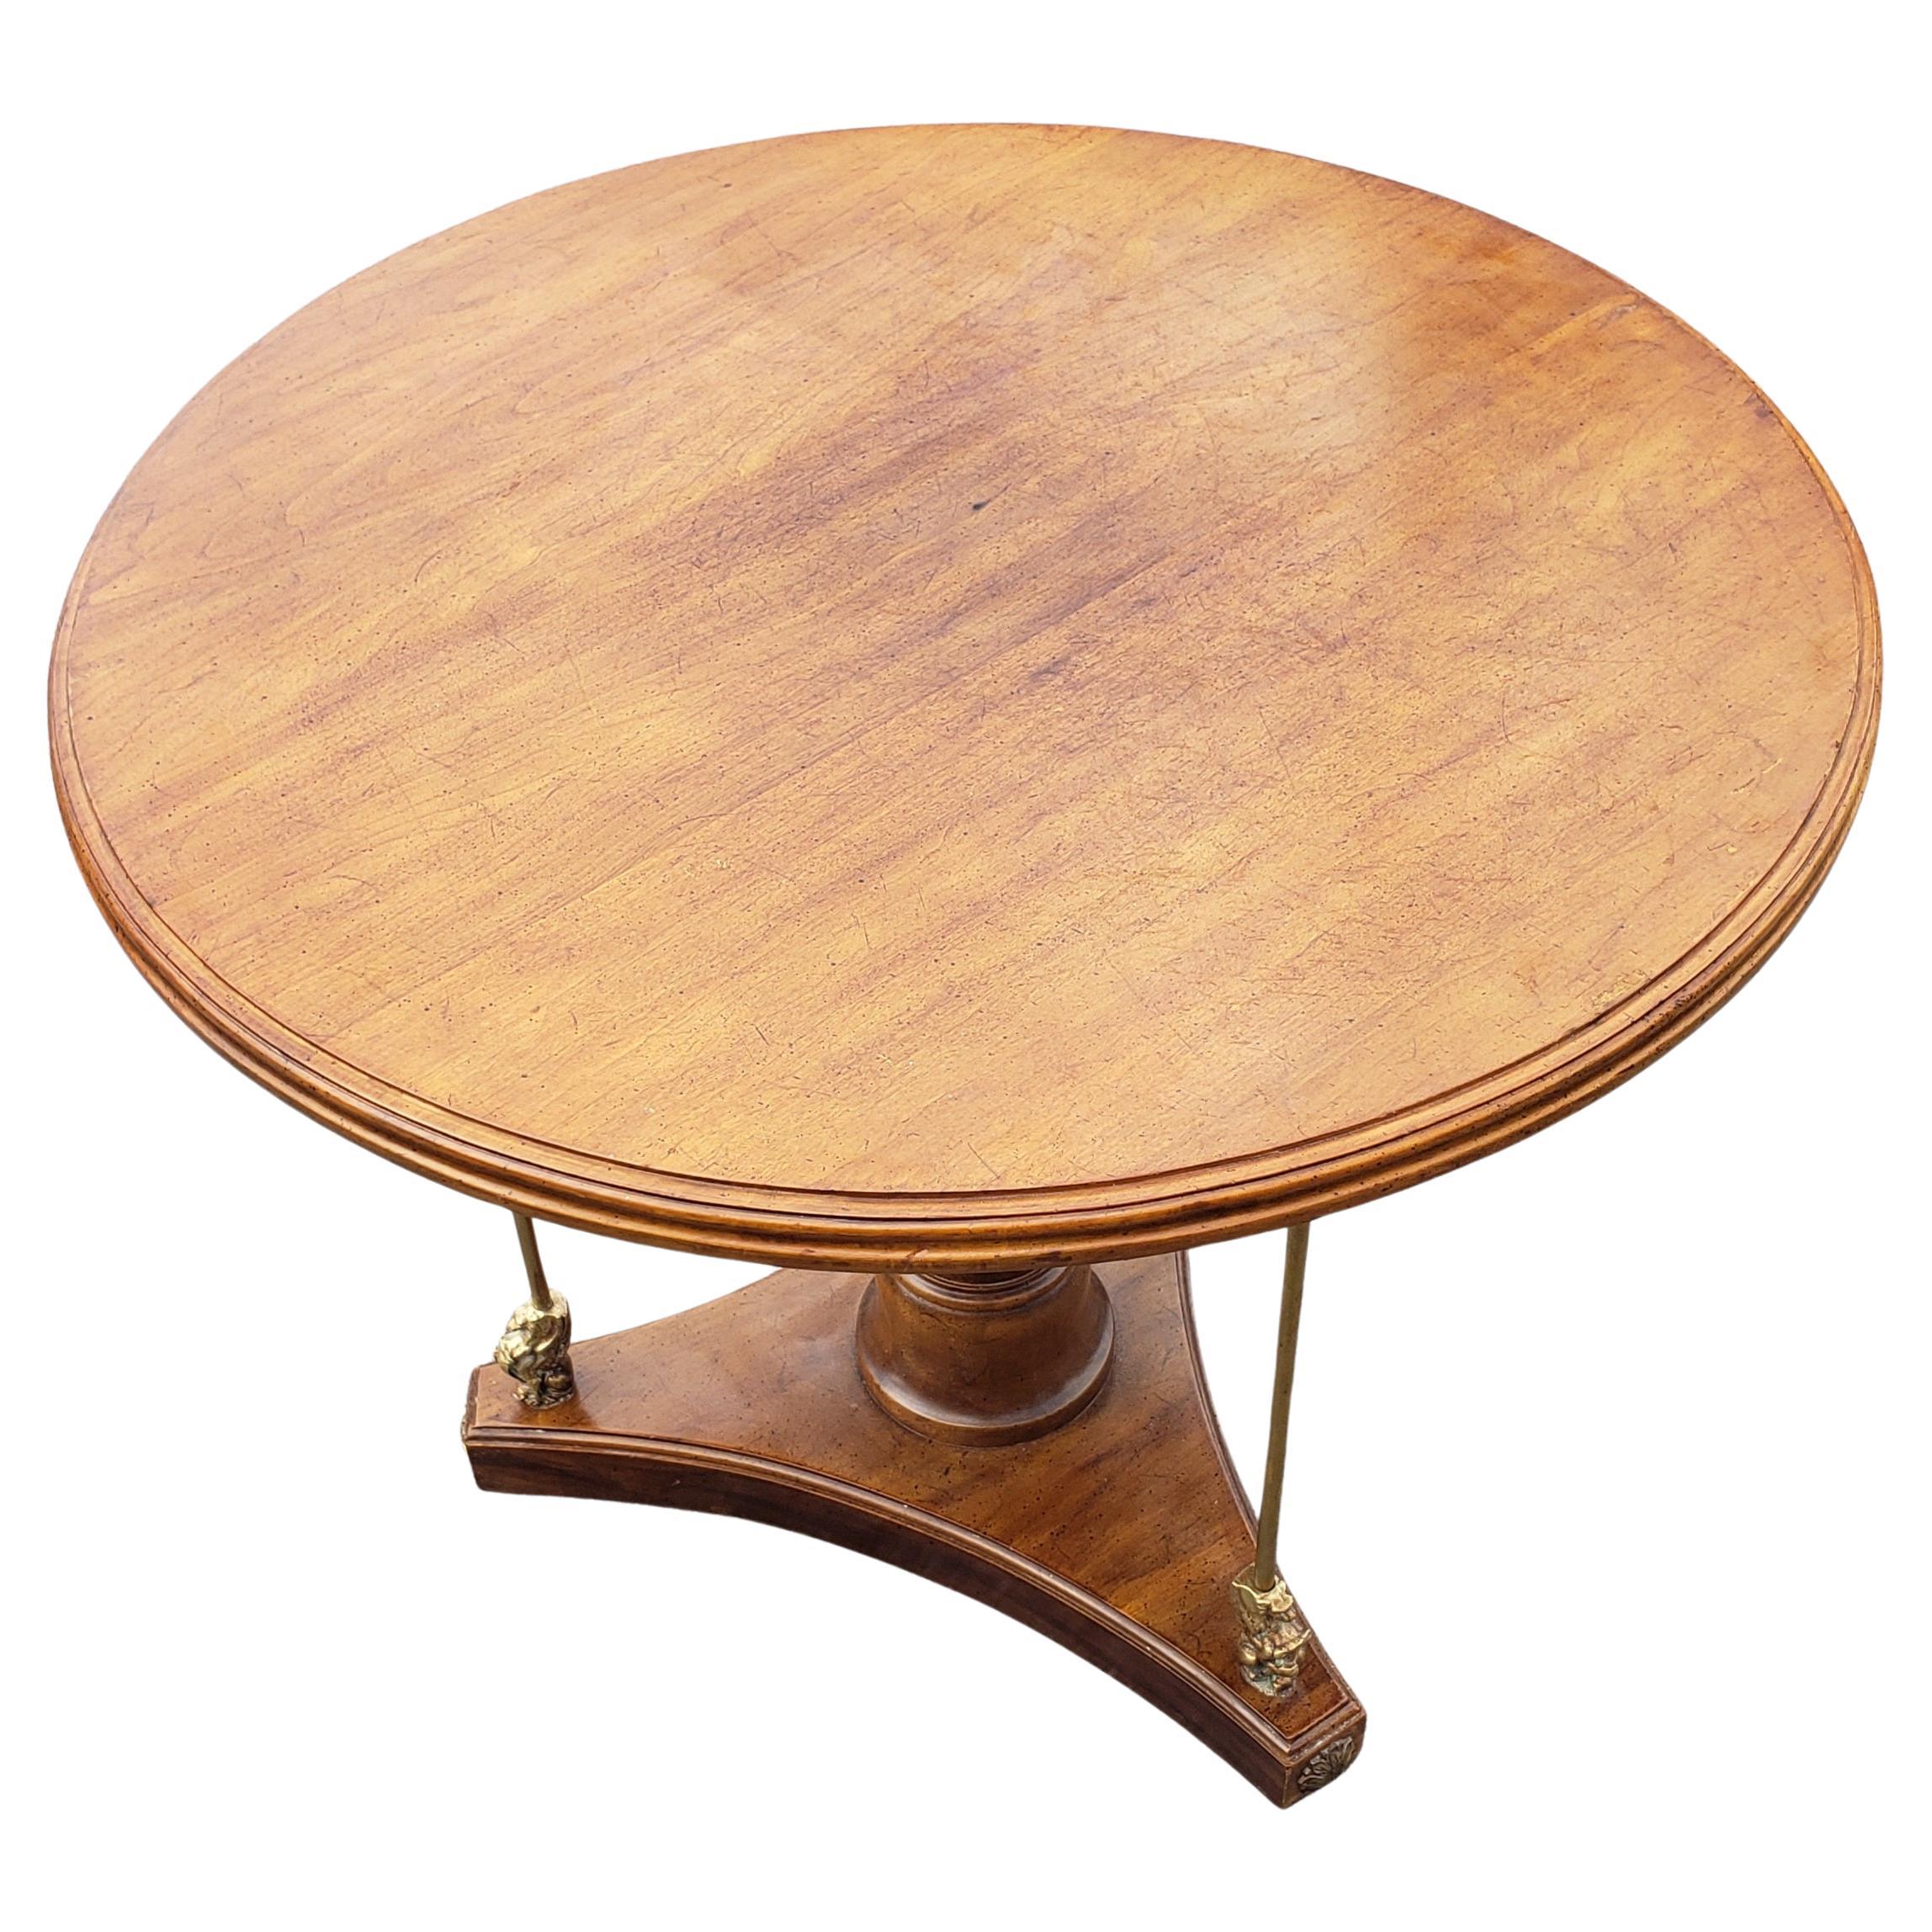 20th Century Charles X Style Calais Cherry & Brass Gueridon Pedestal Table by Davis Cabinet For Sale